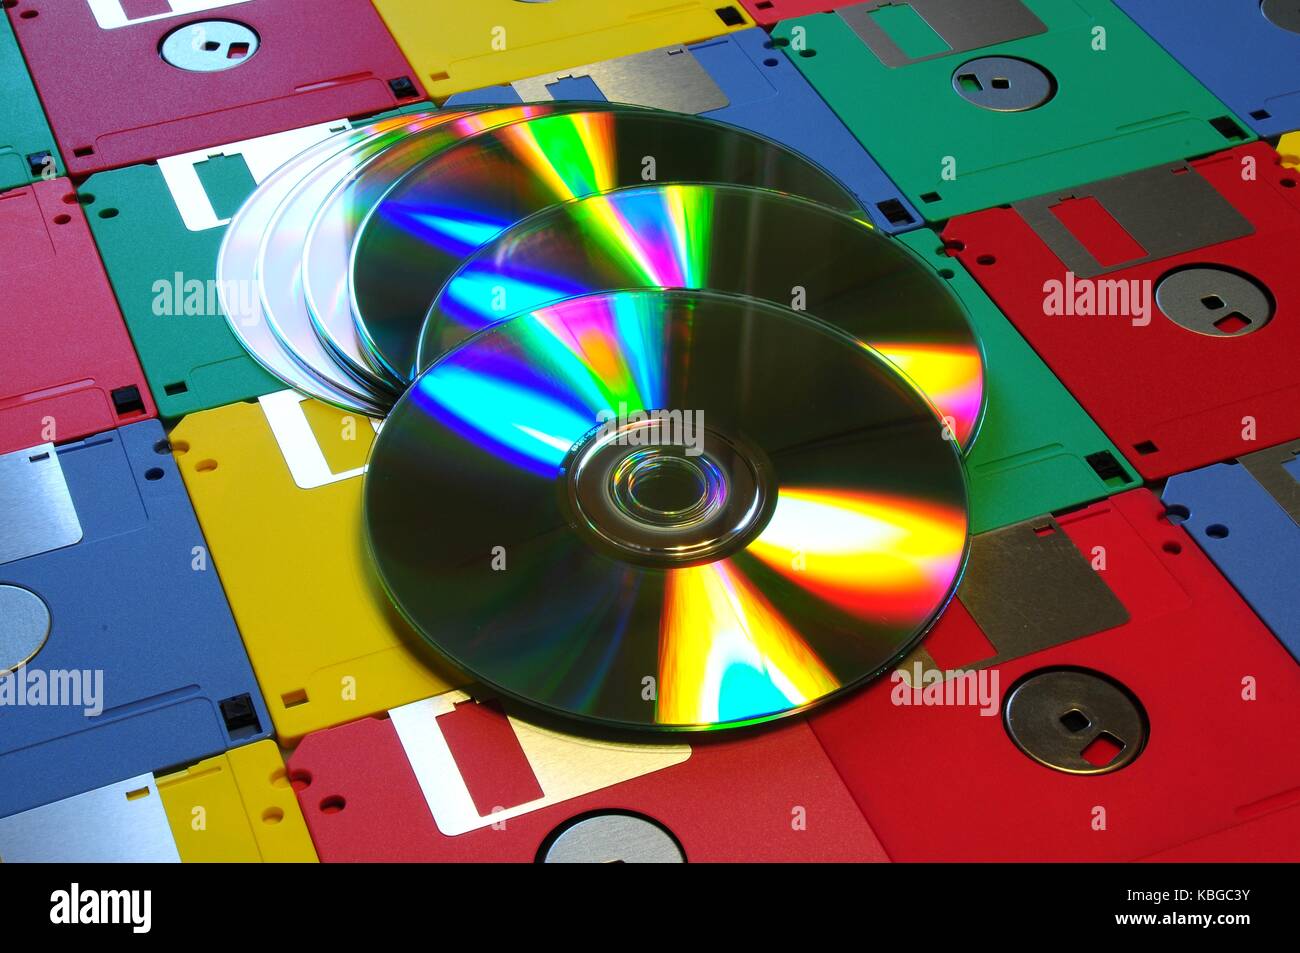 Old diskette 5 25 inches with 3.5 floppy disks of various colors with modern DVD. Background Stock Photo